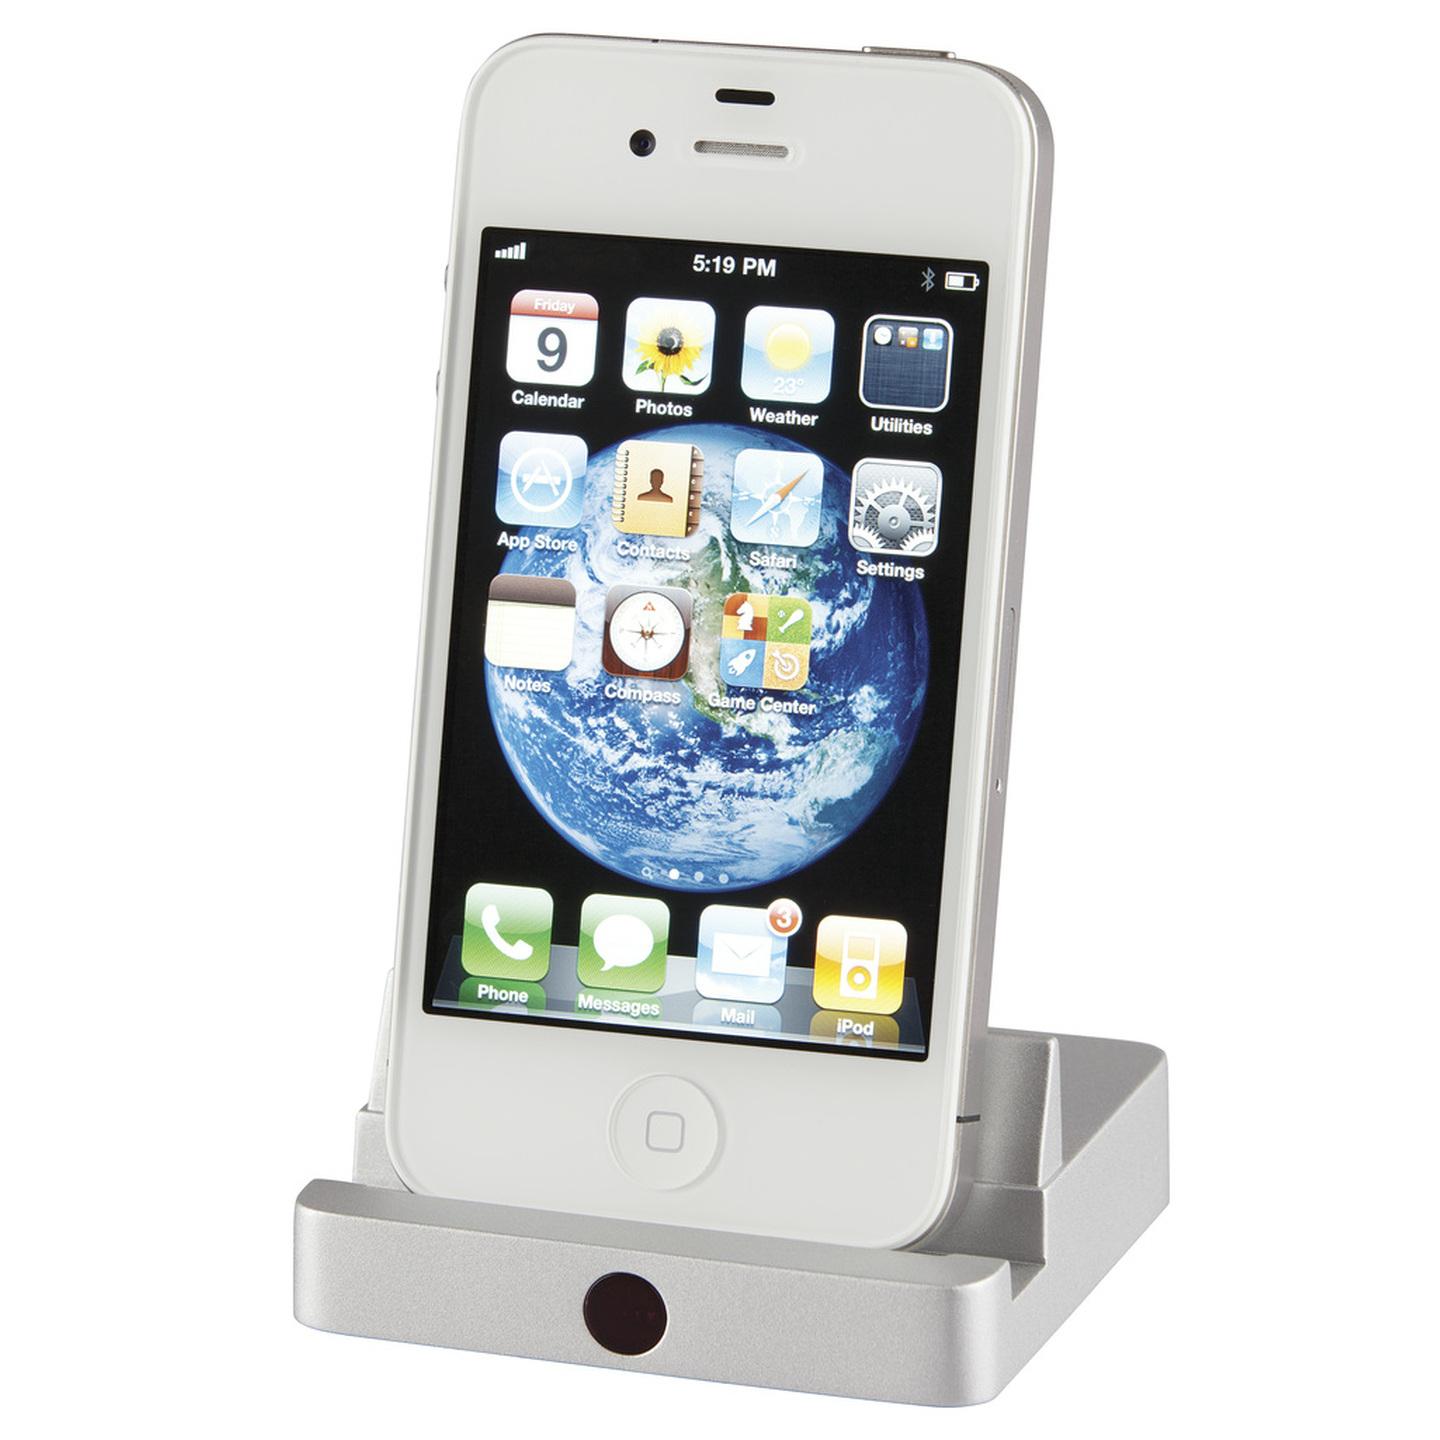 HDMI Docking Station for iPad/iPhone/iPod with Remote